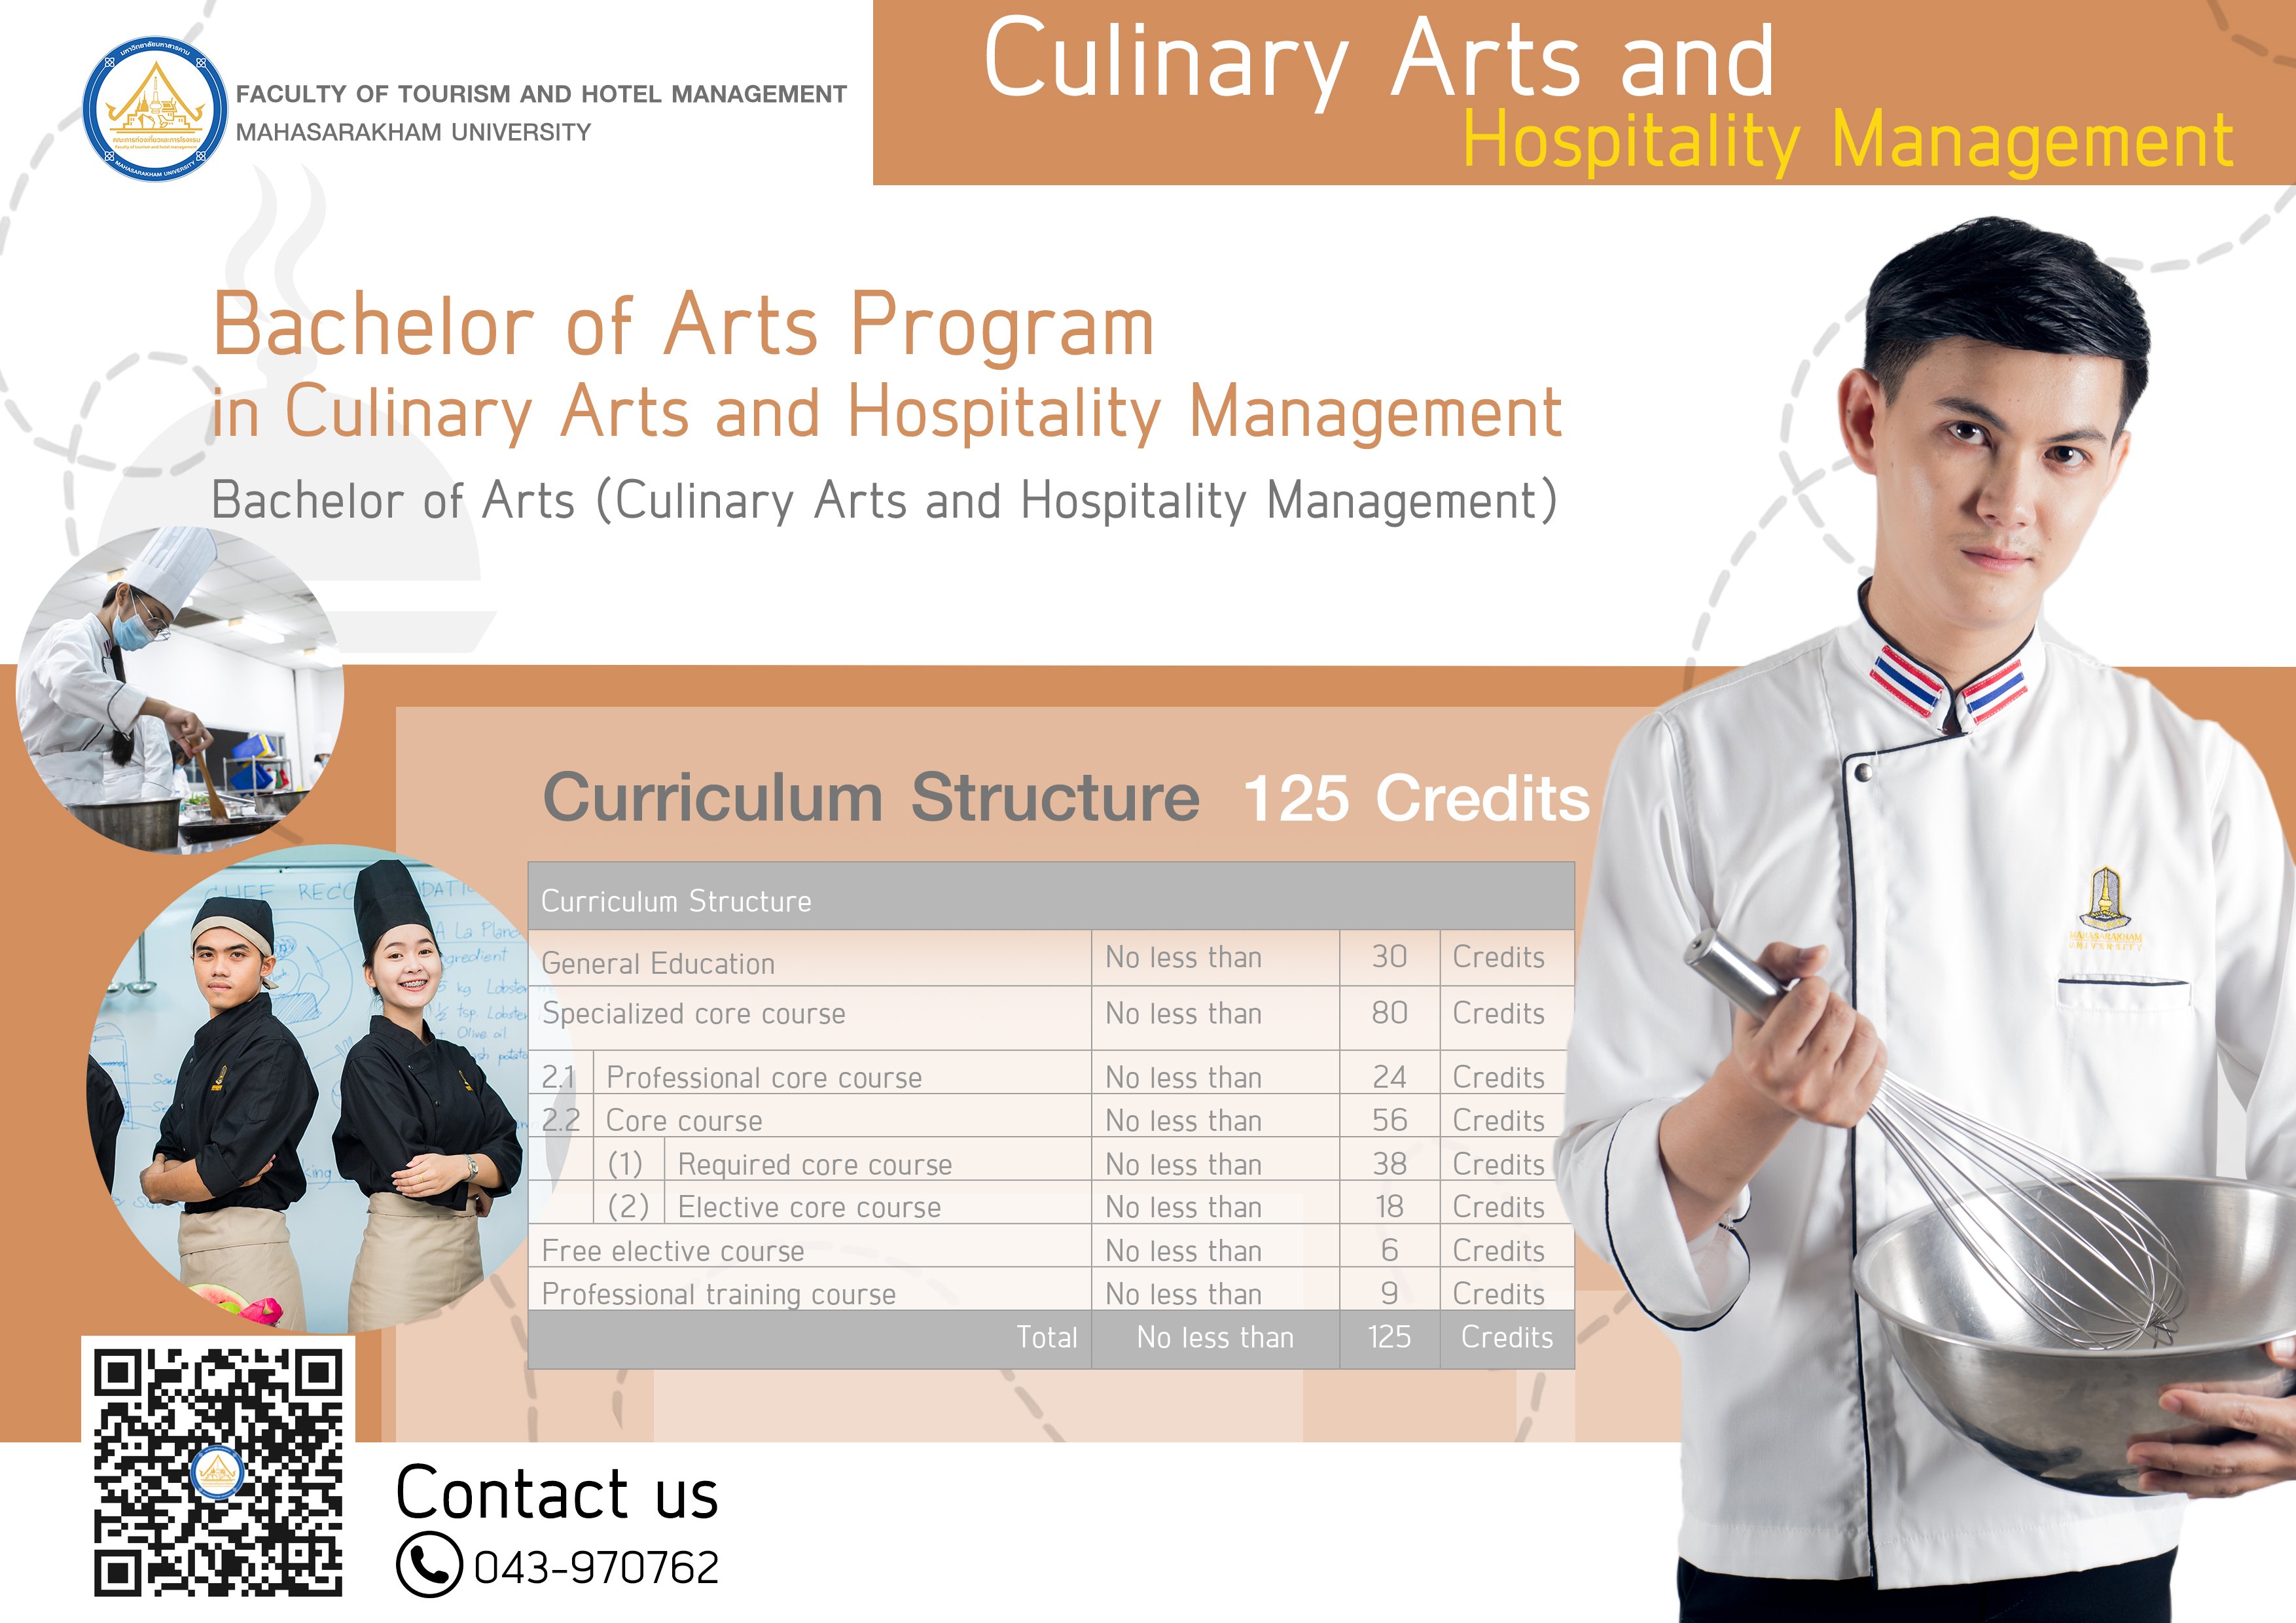 Bachelor of Arts Program in Culinary Arts and Hospitality Management